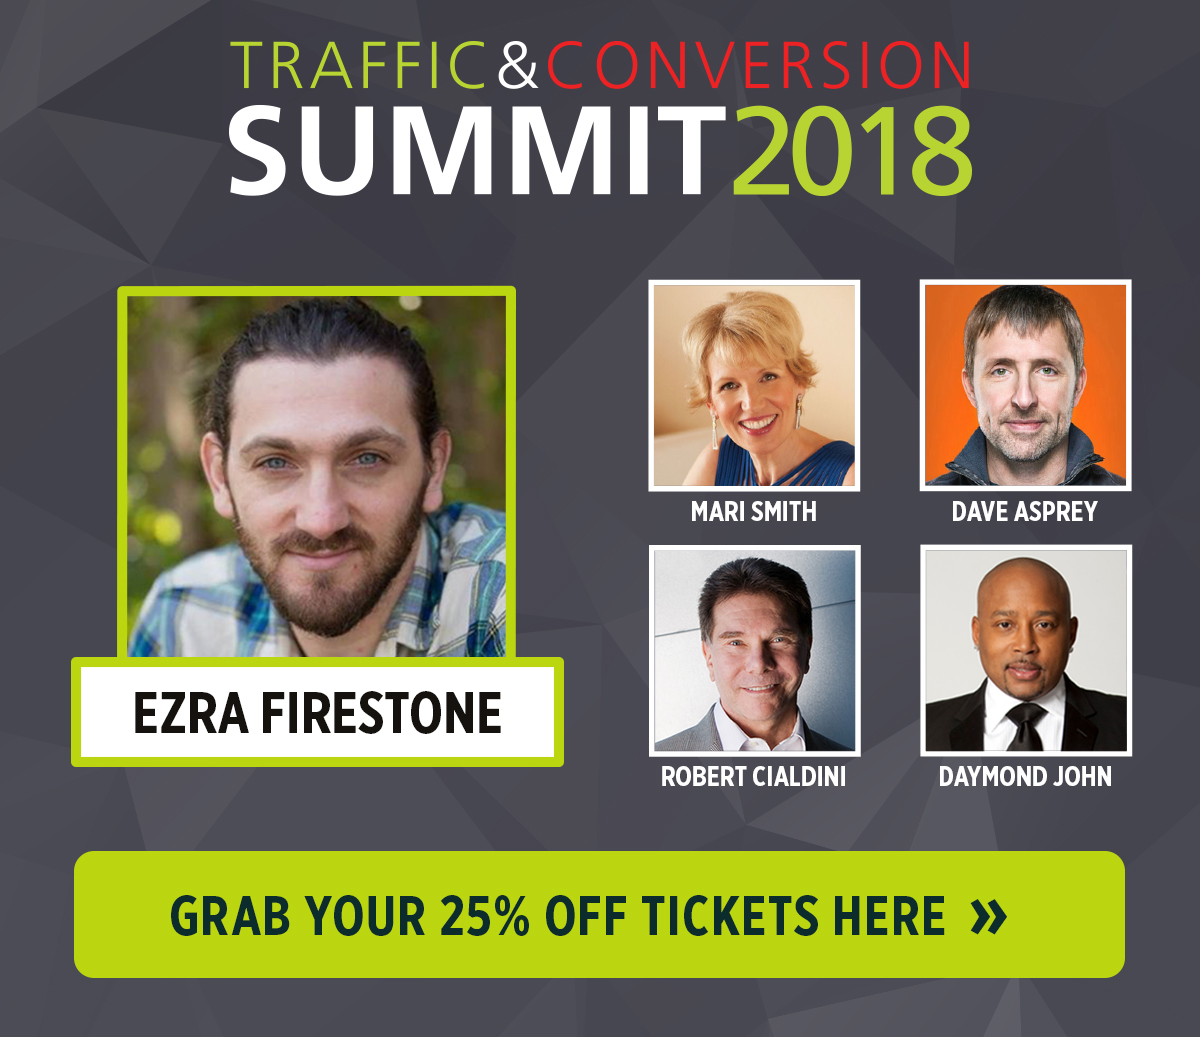 See Ezra Firestone speak at Traffic & Conversion Summit 2018 and save 25% off your ticket!